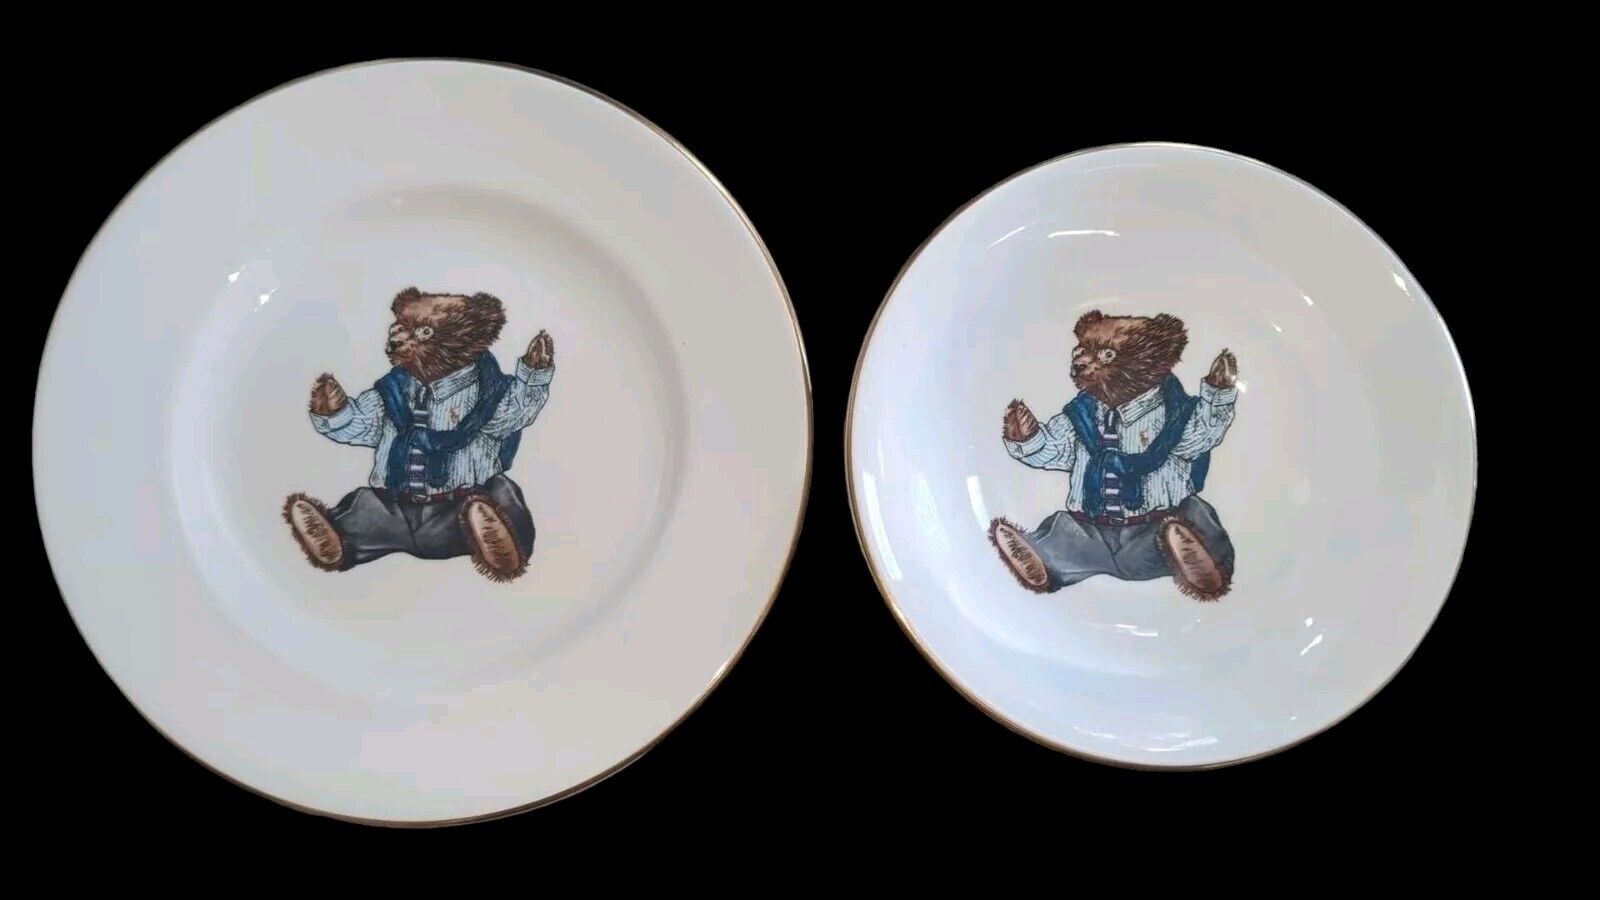 Rare 1992 Ralph Lauren Sweater Tie Polo Bear Wedgwood Porcelain Plate And Bowl